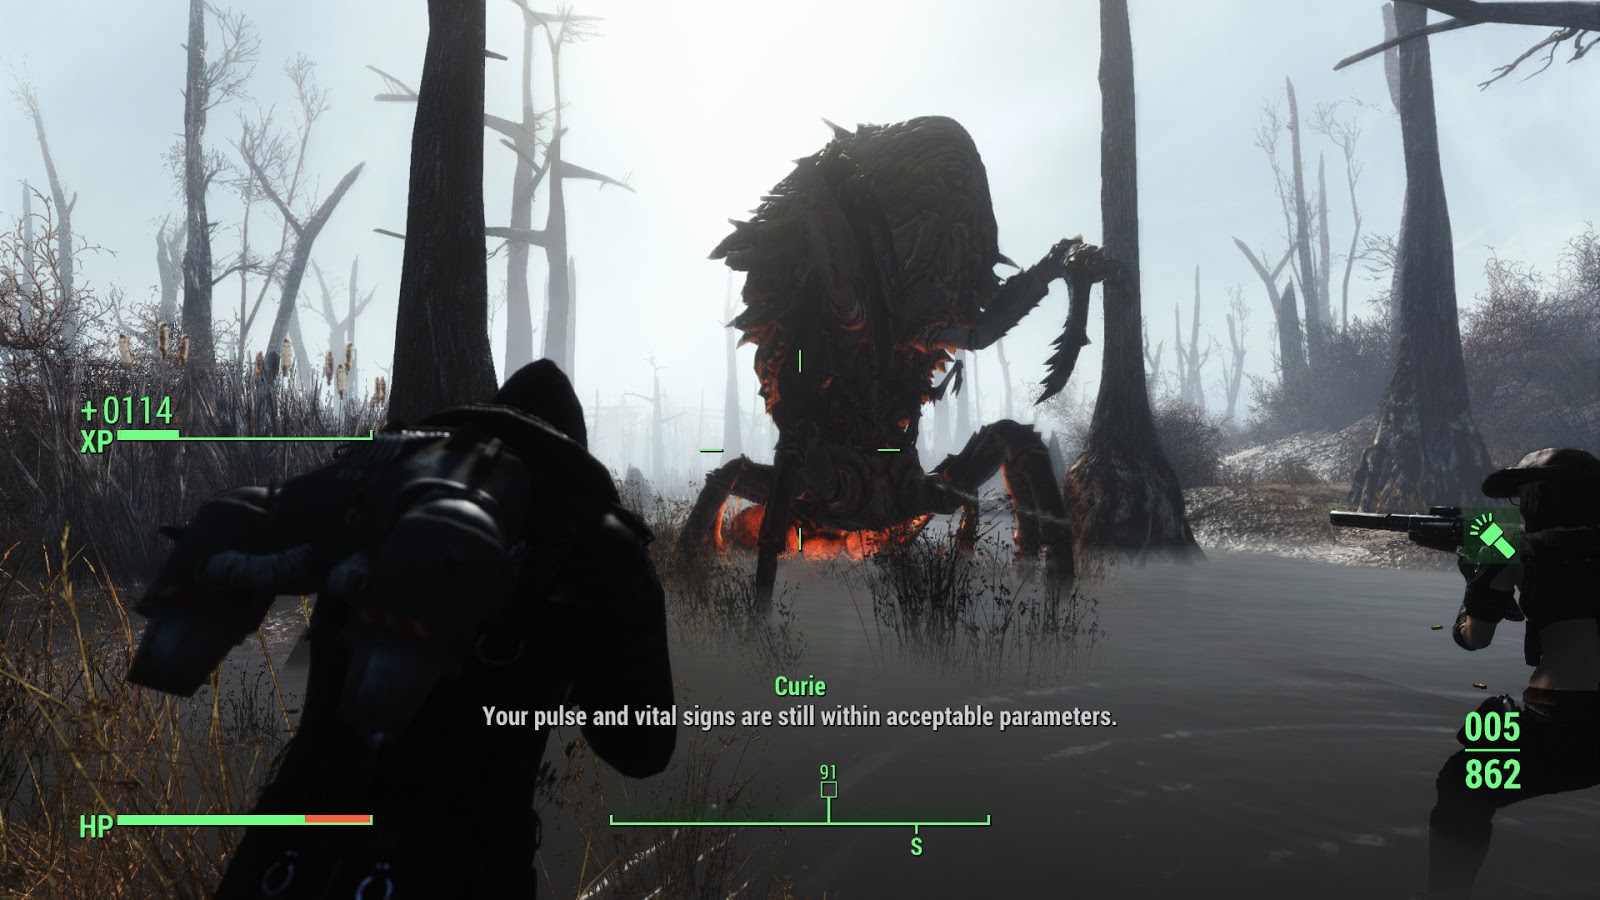 I wish that this cryo suit from the outer world's was a fallout 4 mod :  r/Fallout4Mods